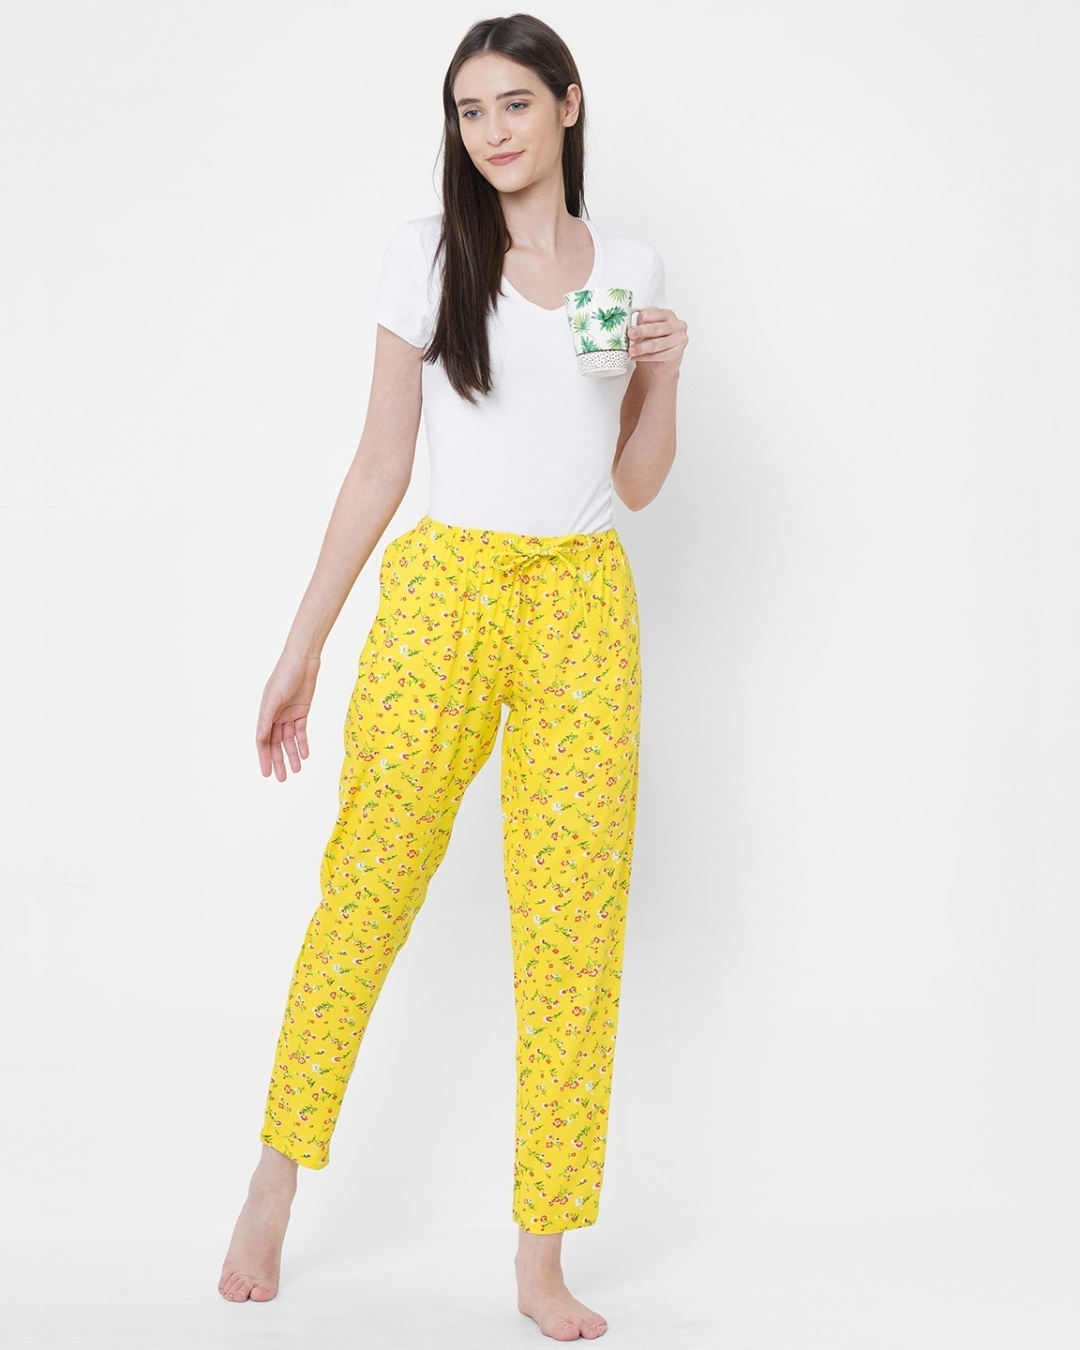 Shop Women's Yellow All Over Floral Printed Lounge Pants